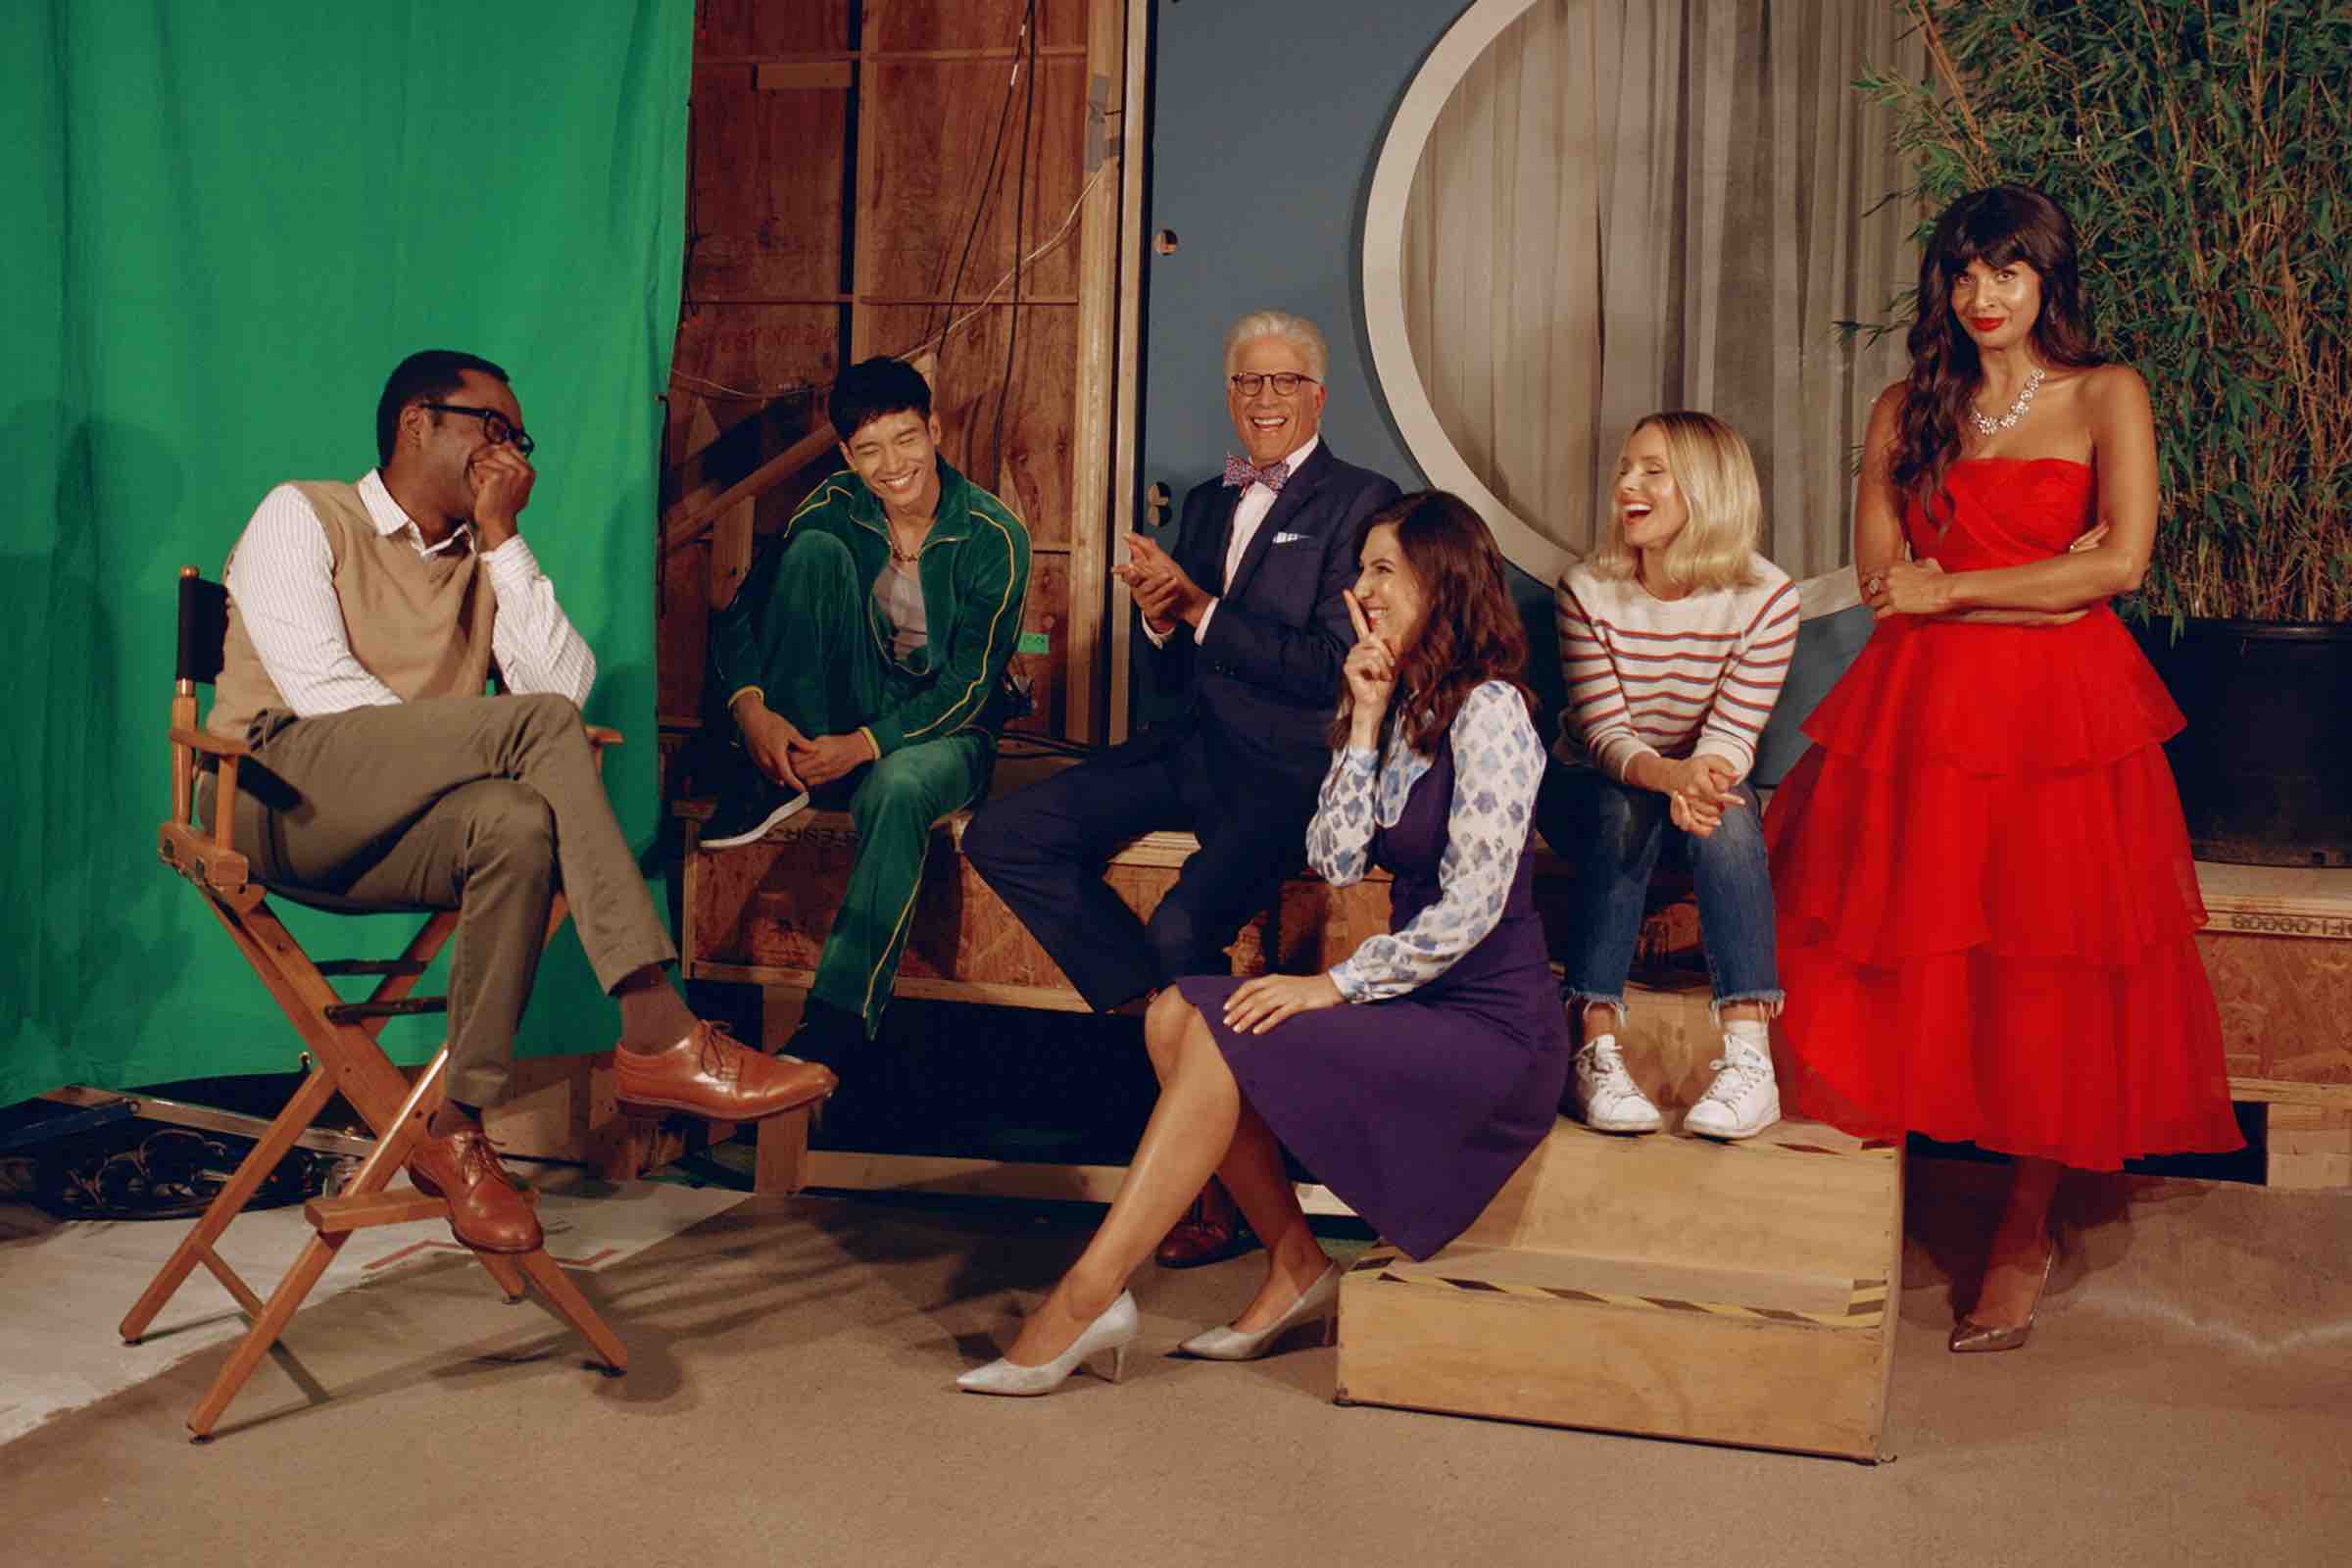 Watching 'The Good Place''s demons work together is so good we’re pitching our 'The Office'-style spinoff featuring the Bad Place demons.